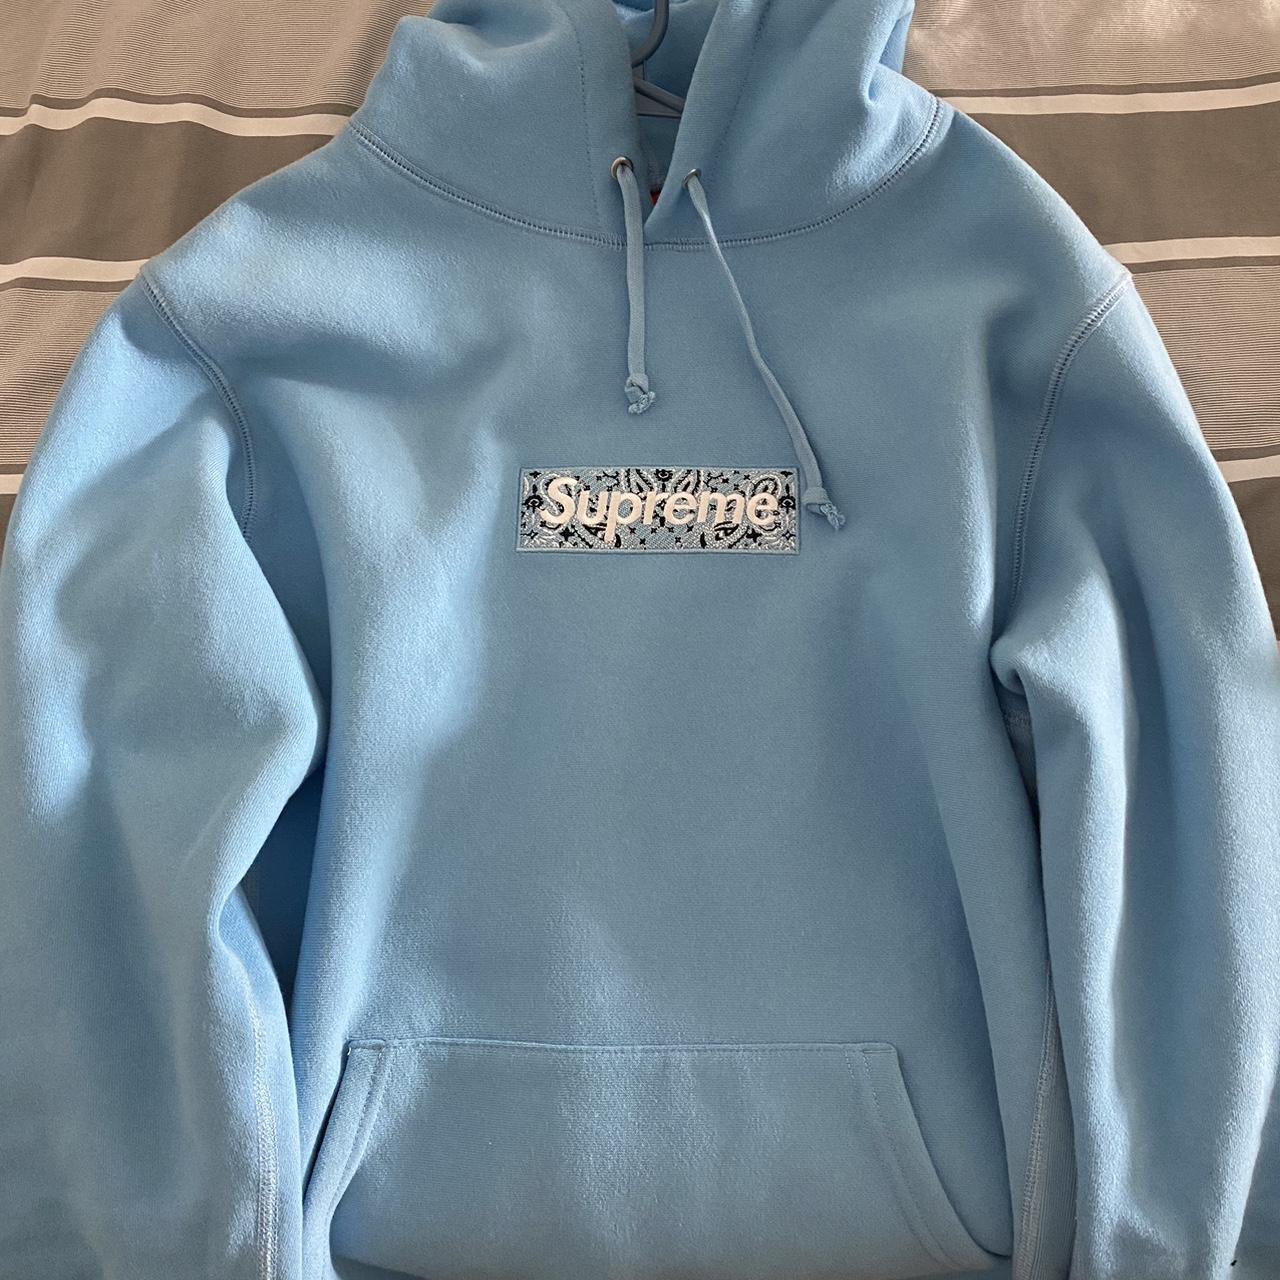 Supreme Brooklyn Camo zip pullover Only worn for - Depop